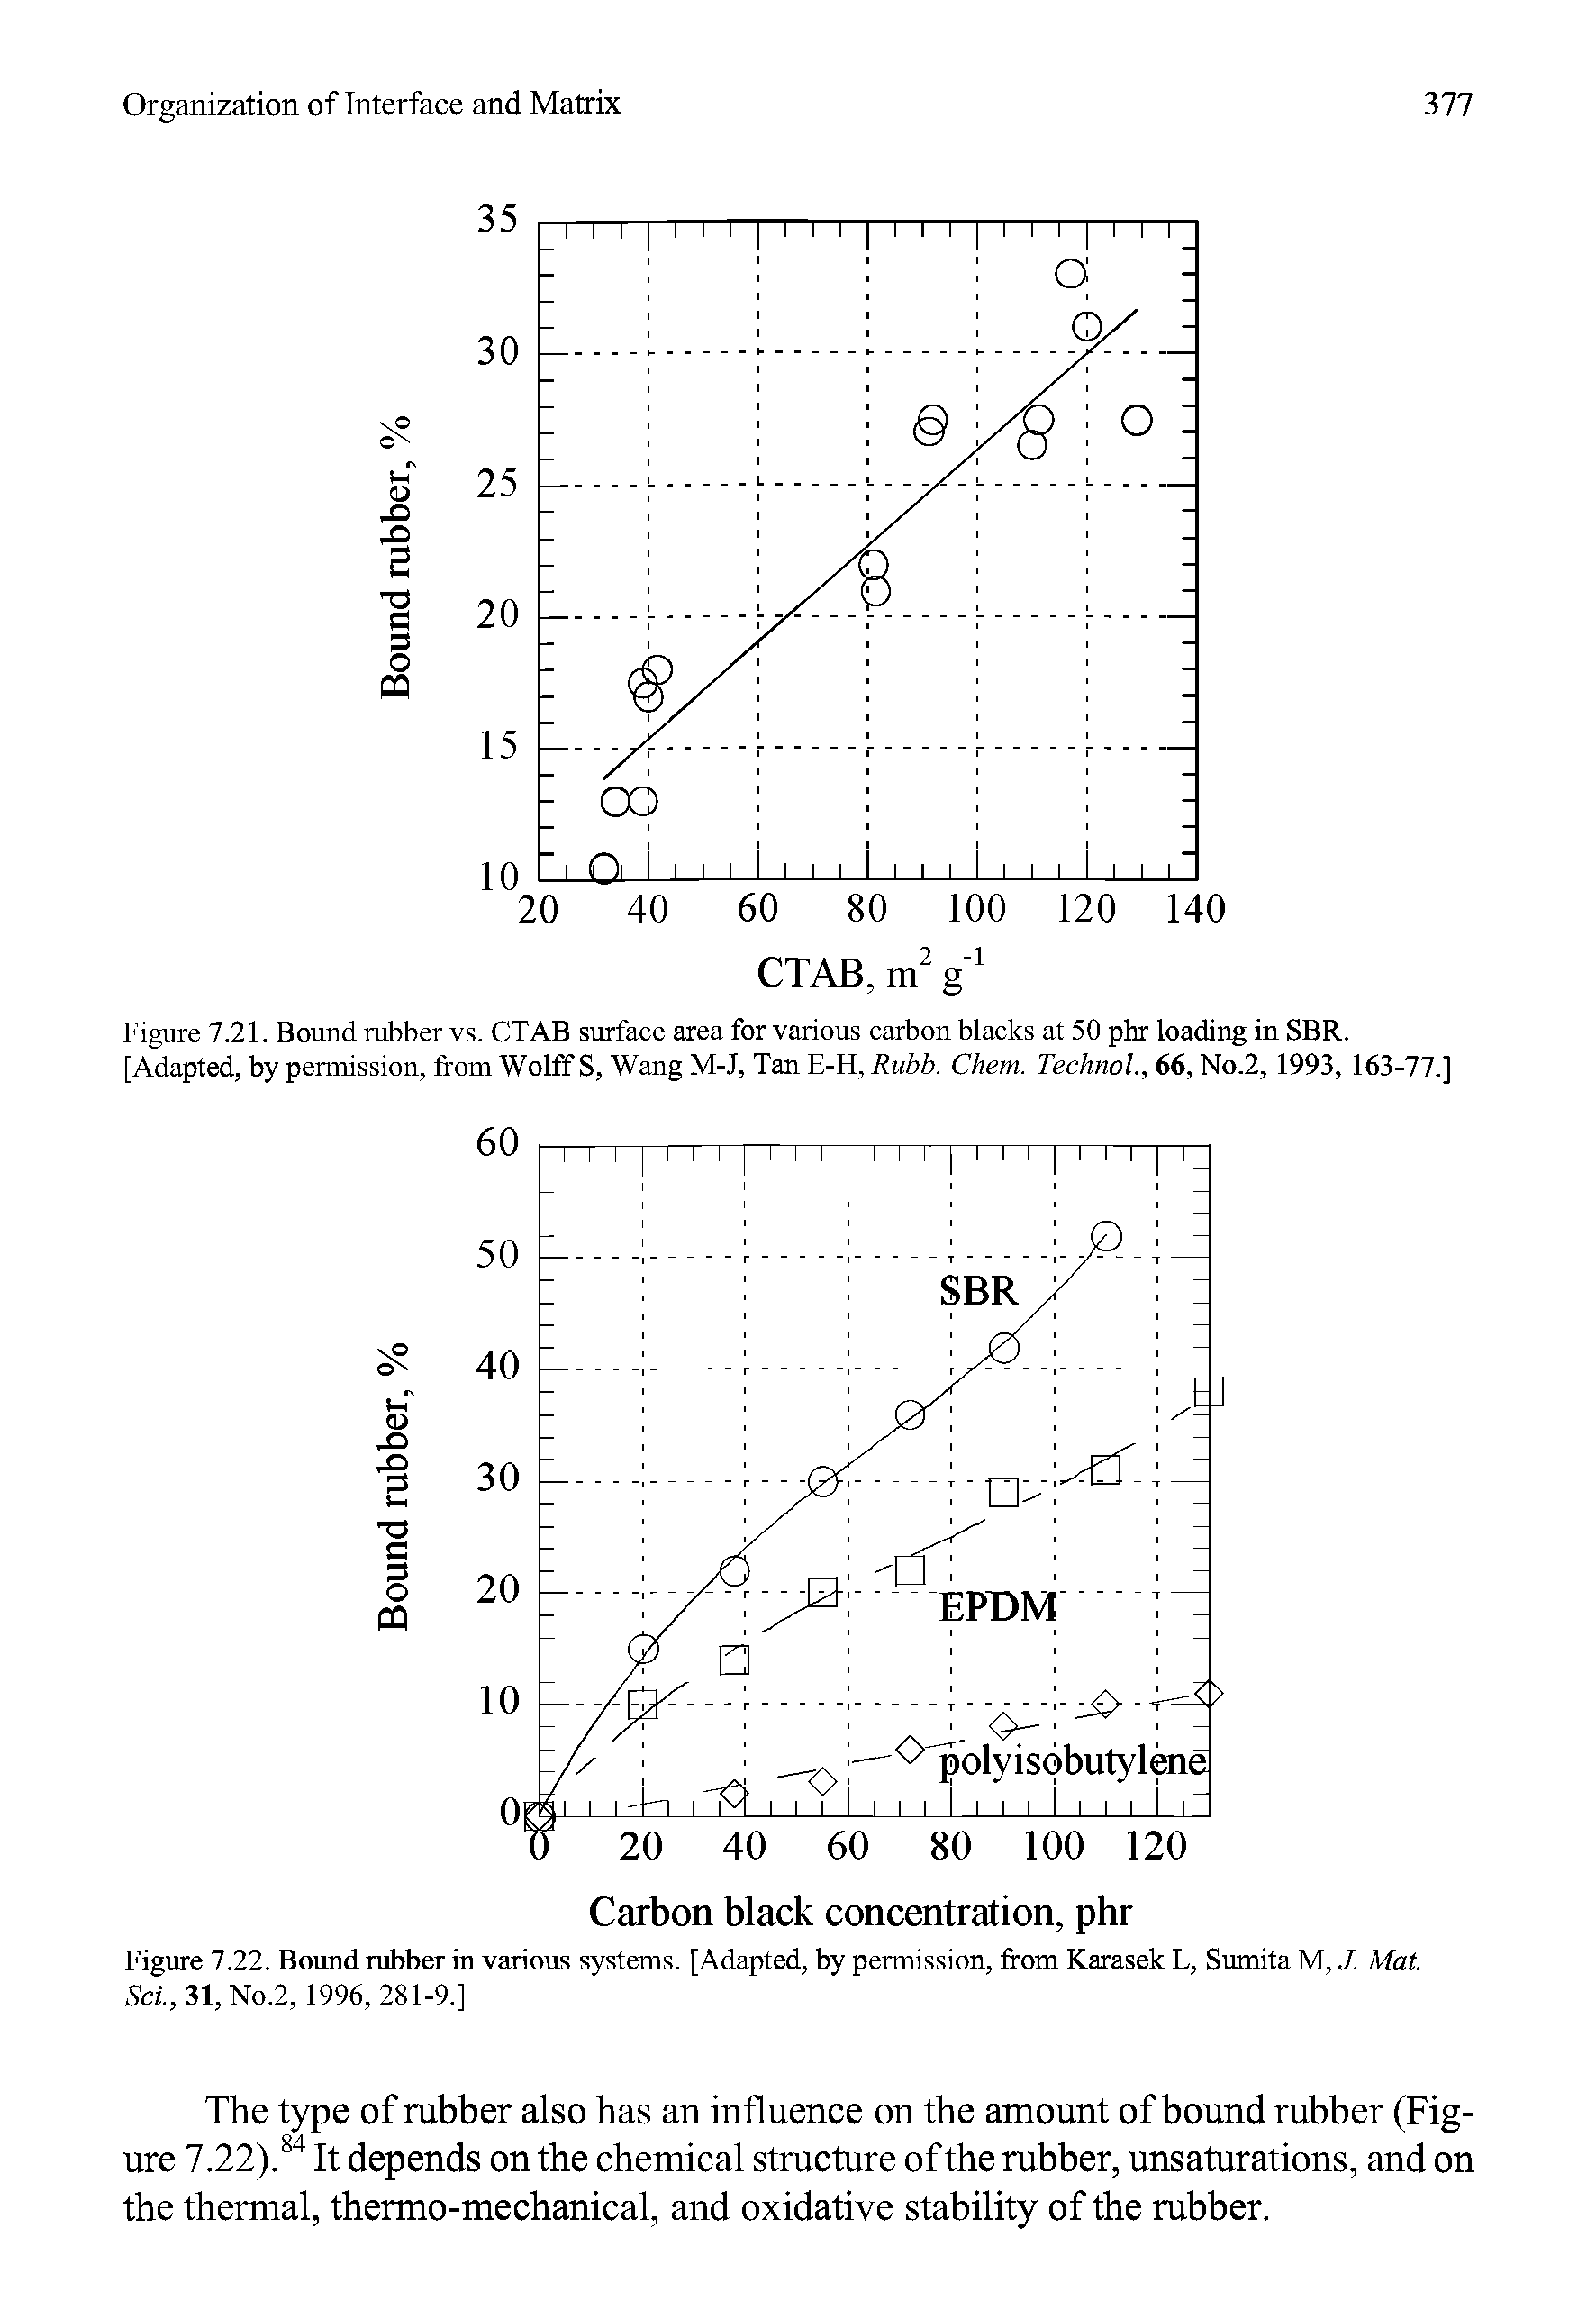 Figure 7.21. Bound rubber vs. CTAB surface area for various carbon blacks at 50 phr loading in SBR. [Adapted, by permission, from Wolff S, Wang M-J, Tan E-H, Ruhh. Chem. Technol., 66, No.2, 1993, 163-77.]...